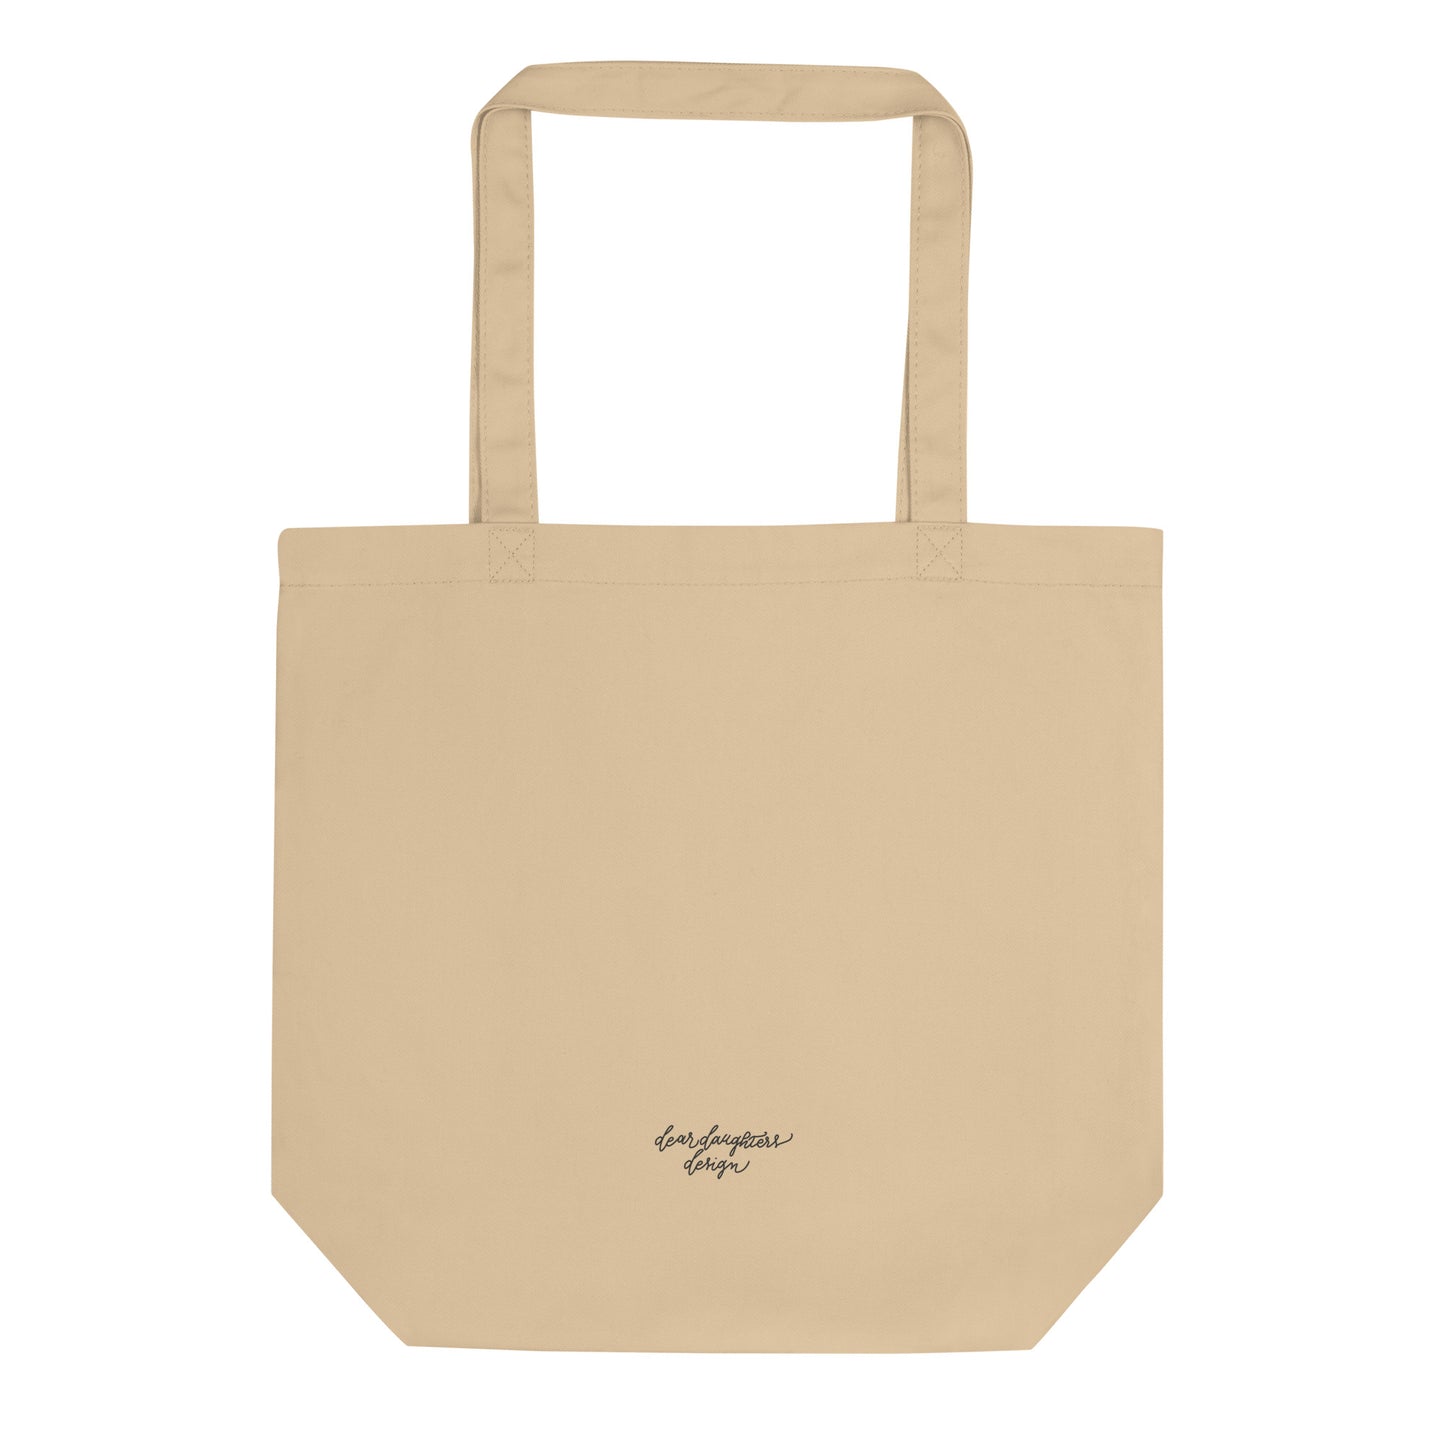 Script "Strong" Calligraphy Certified Organic Cotton Canvas Medium Eco Tote Bag